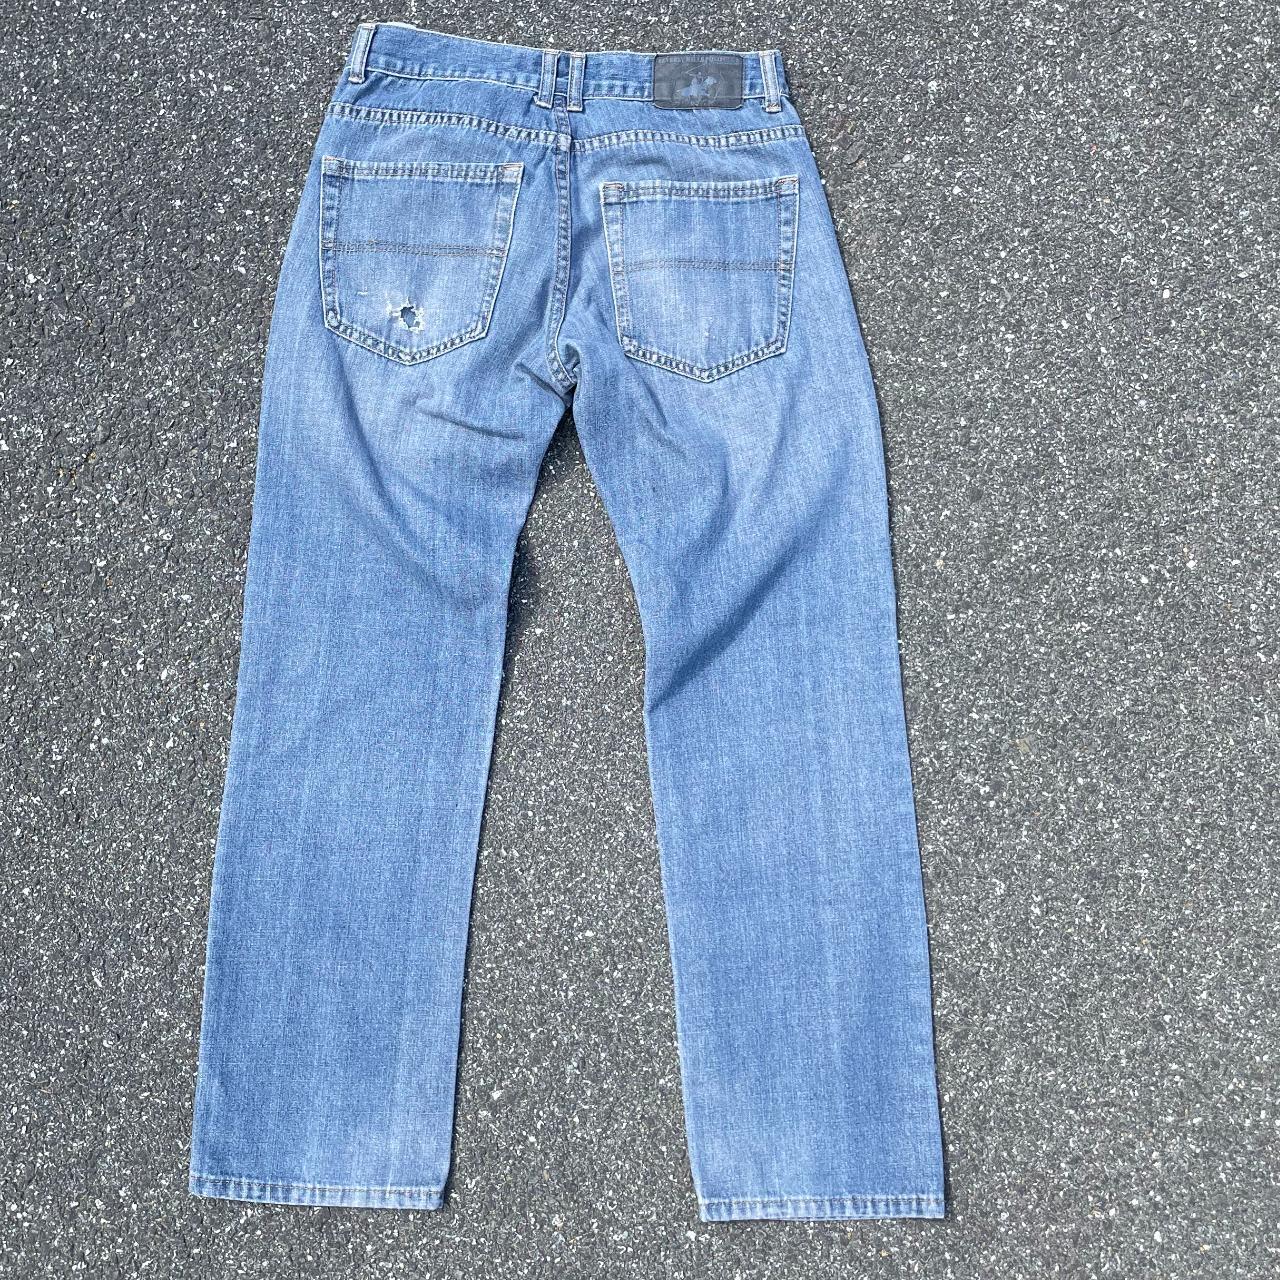 Beverly Hills Polo Club Men's Blue Jeans (5)